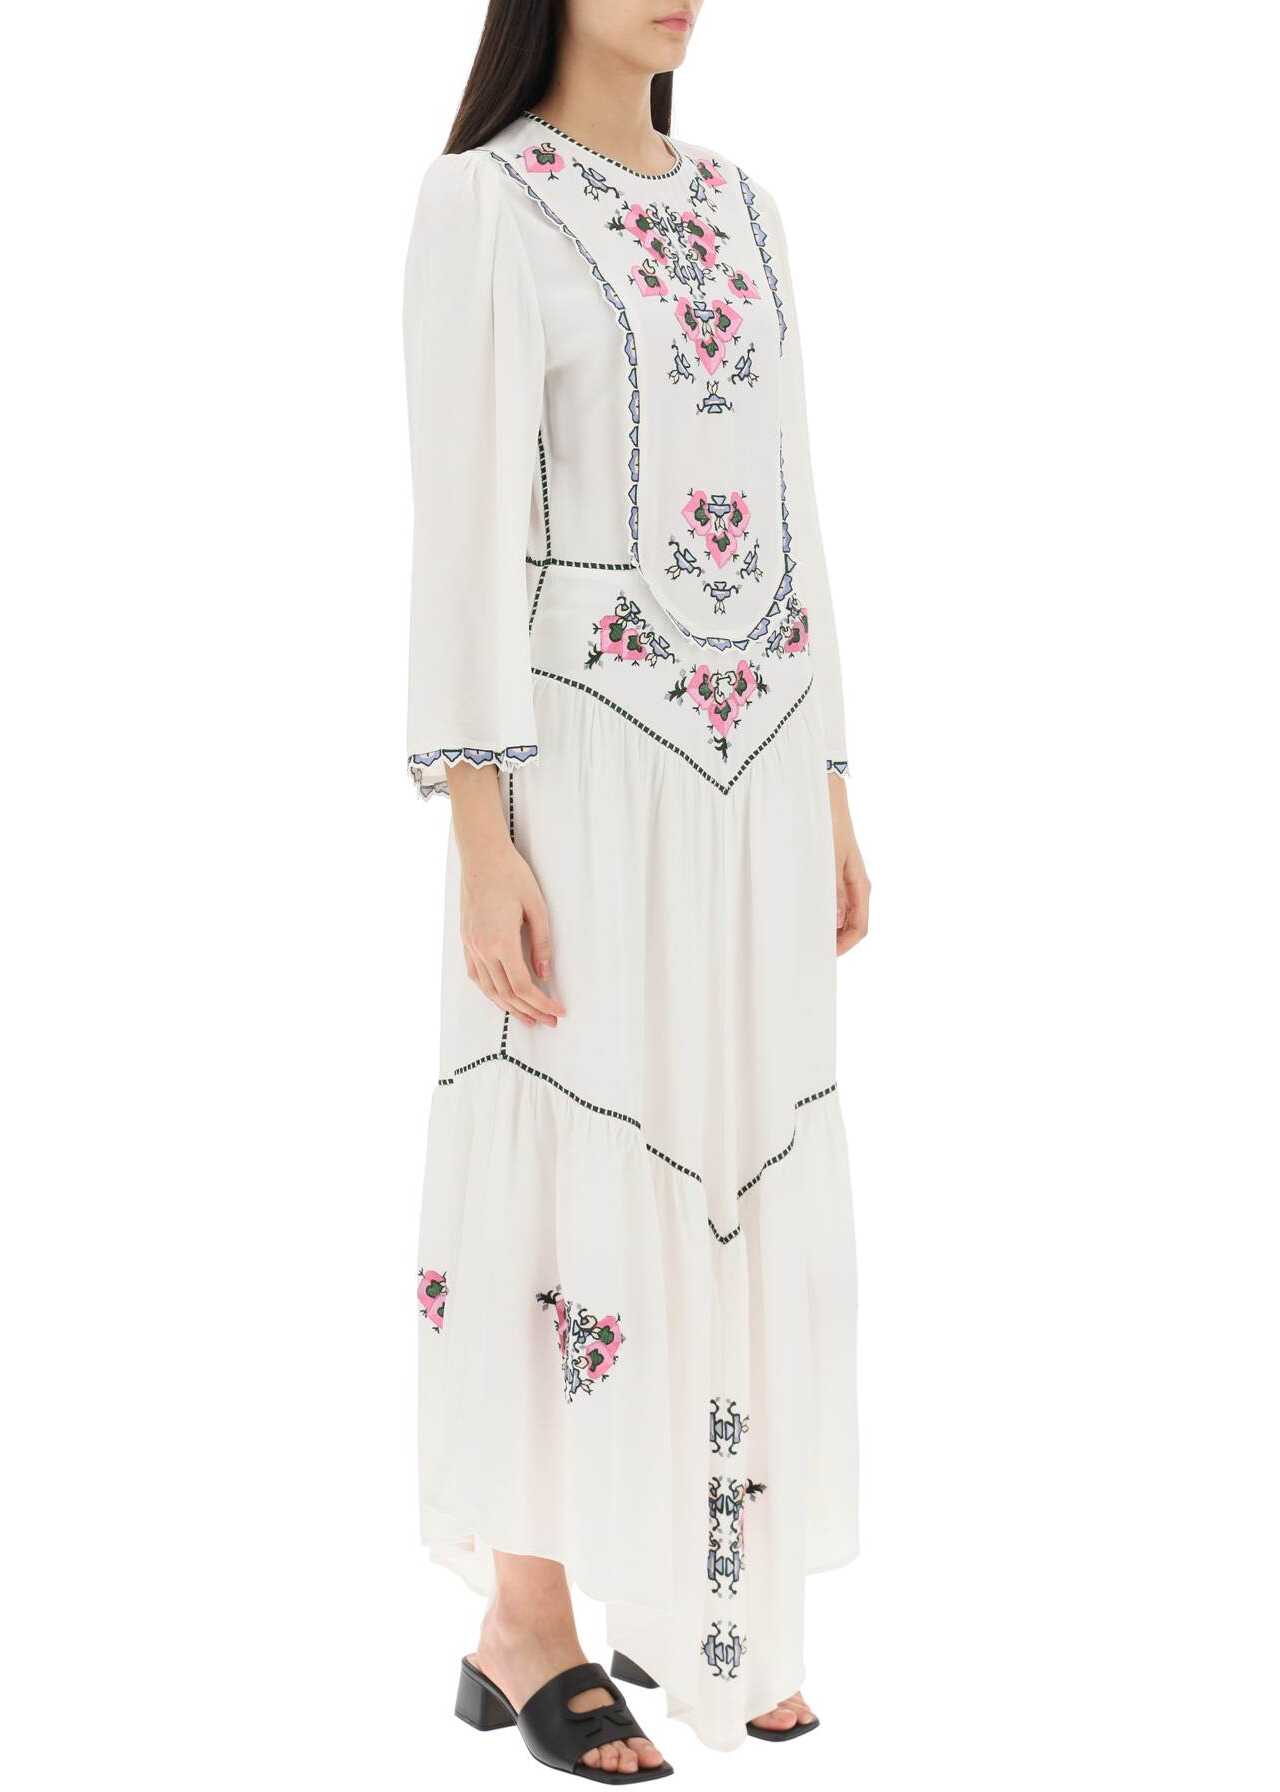 Isabel Marant \'Sonia\' Embroidered Maxi Dress WHITE